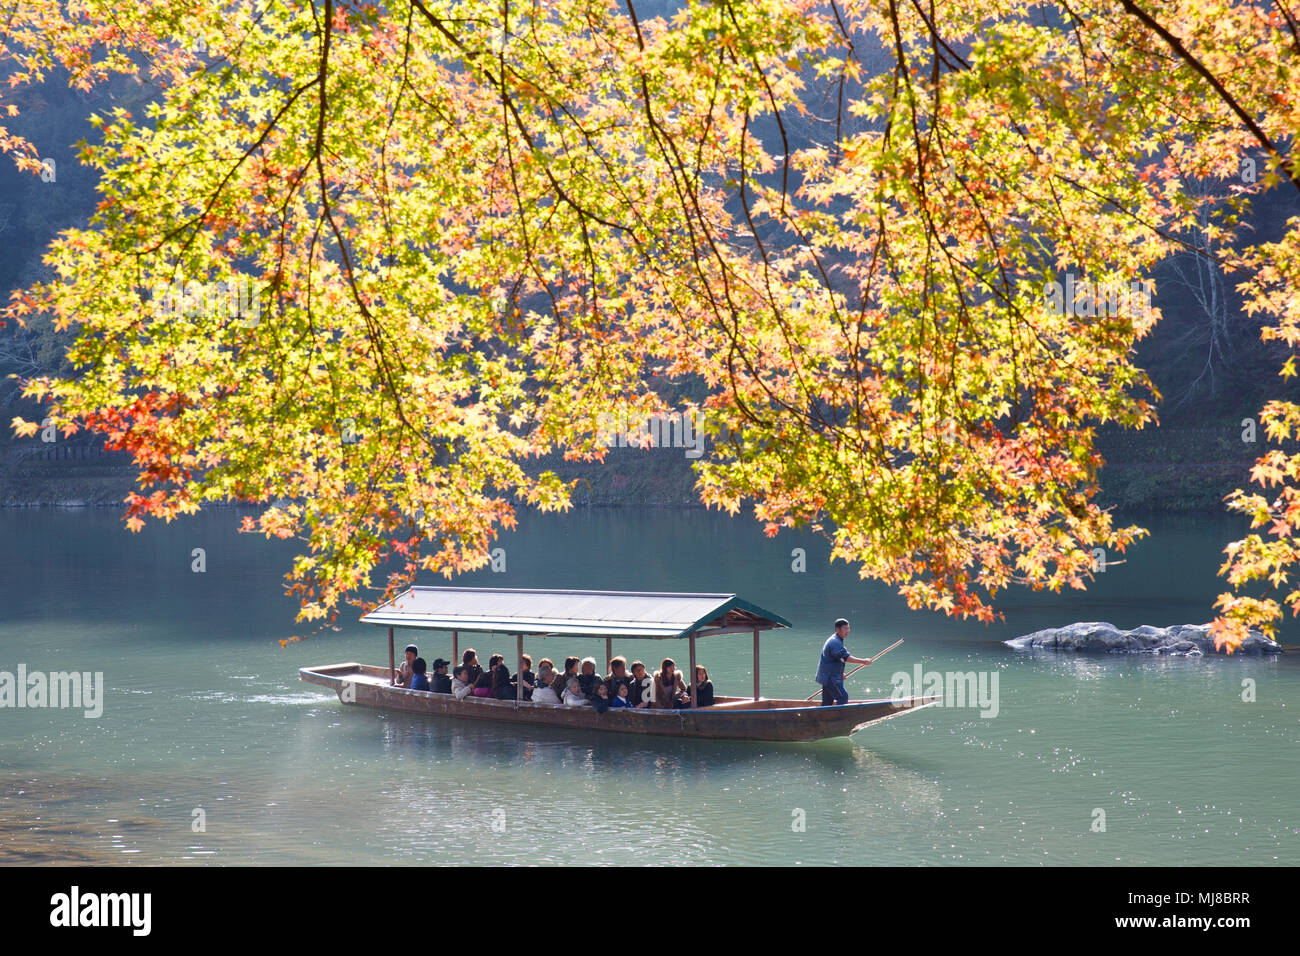 High angle view of group of people on traditional punt on a river in autumn. Stock Photo